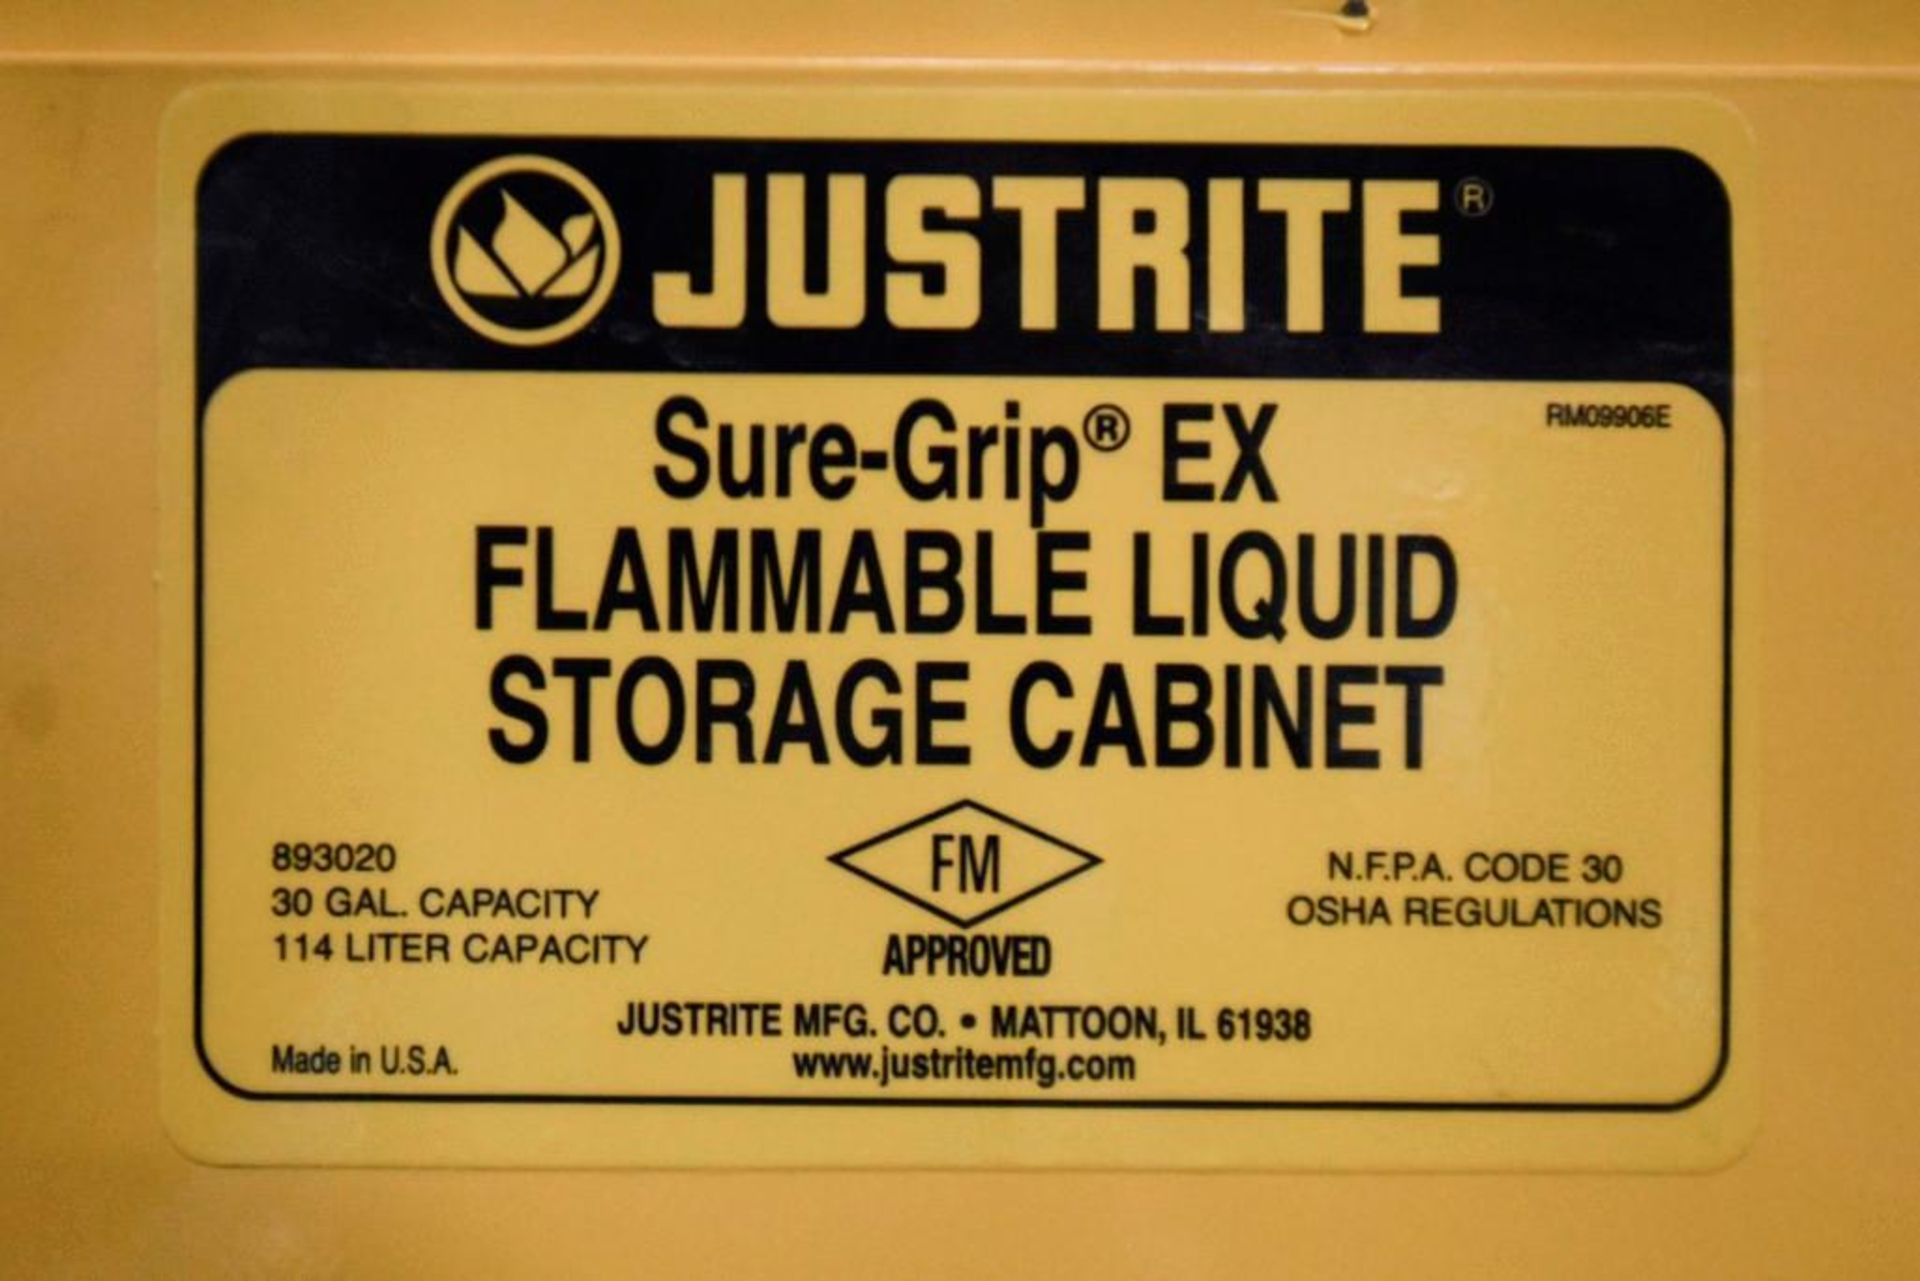 Justrite Chemical Cabinet 30 Gallon Capacity - Image 2 of 7